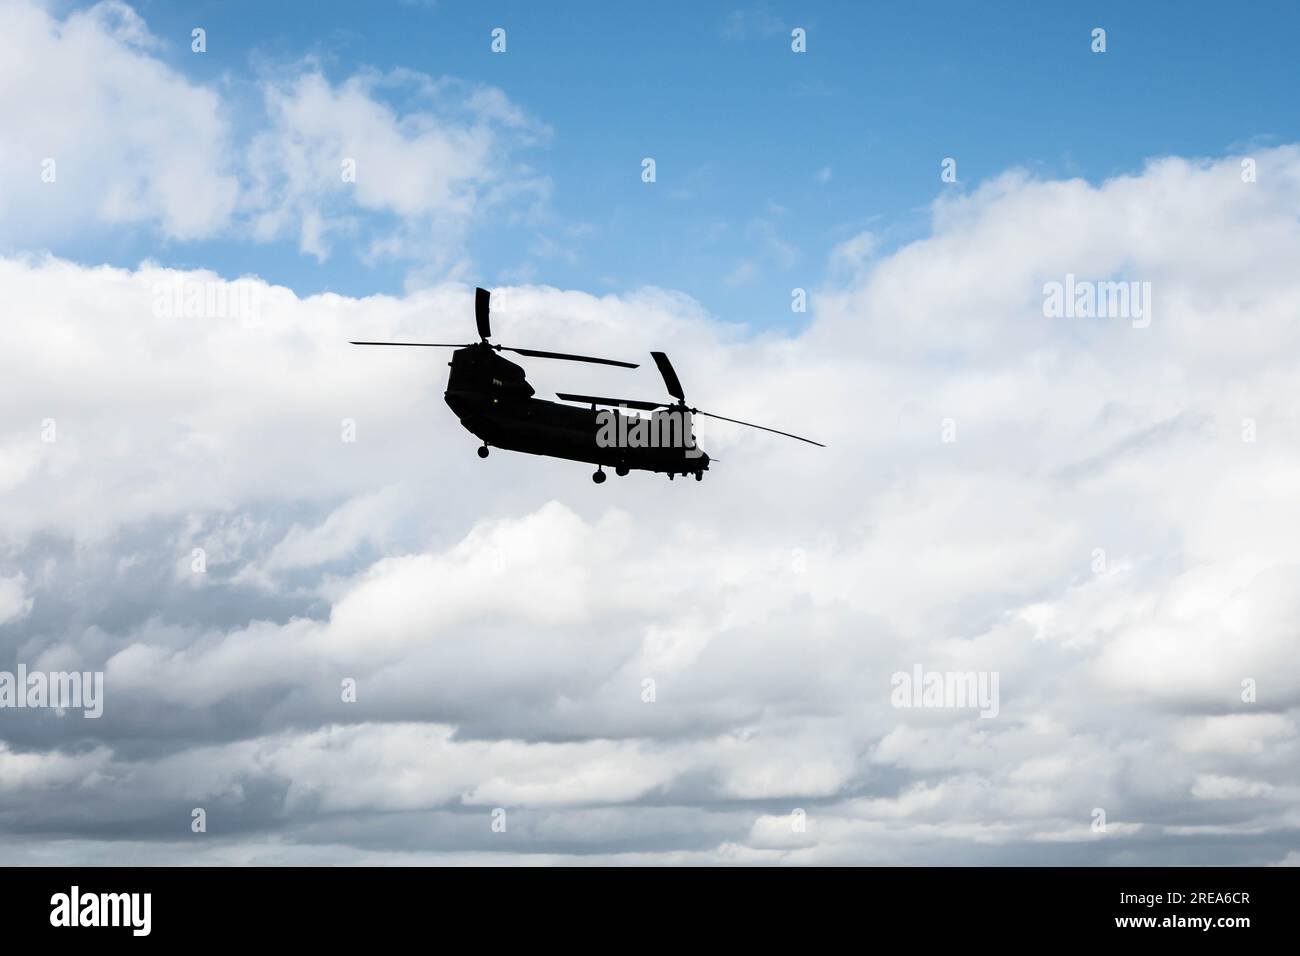 Silhouette of a Boeing V-22 Osprey aircraft on a blue sky Stock Photo